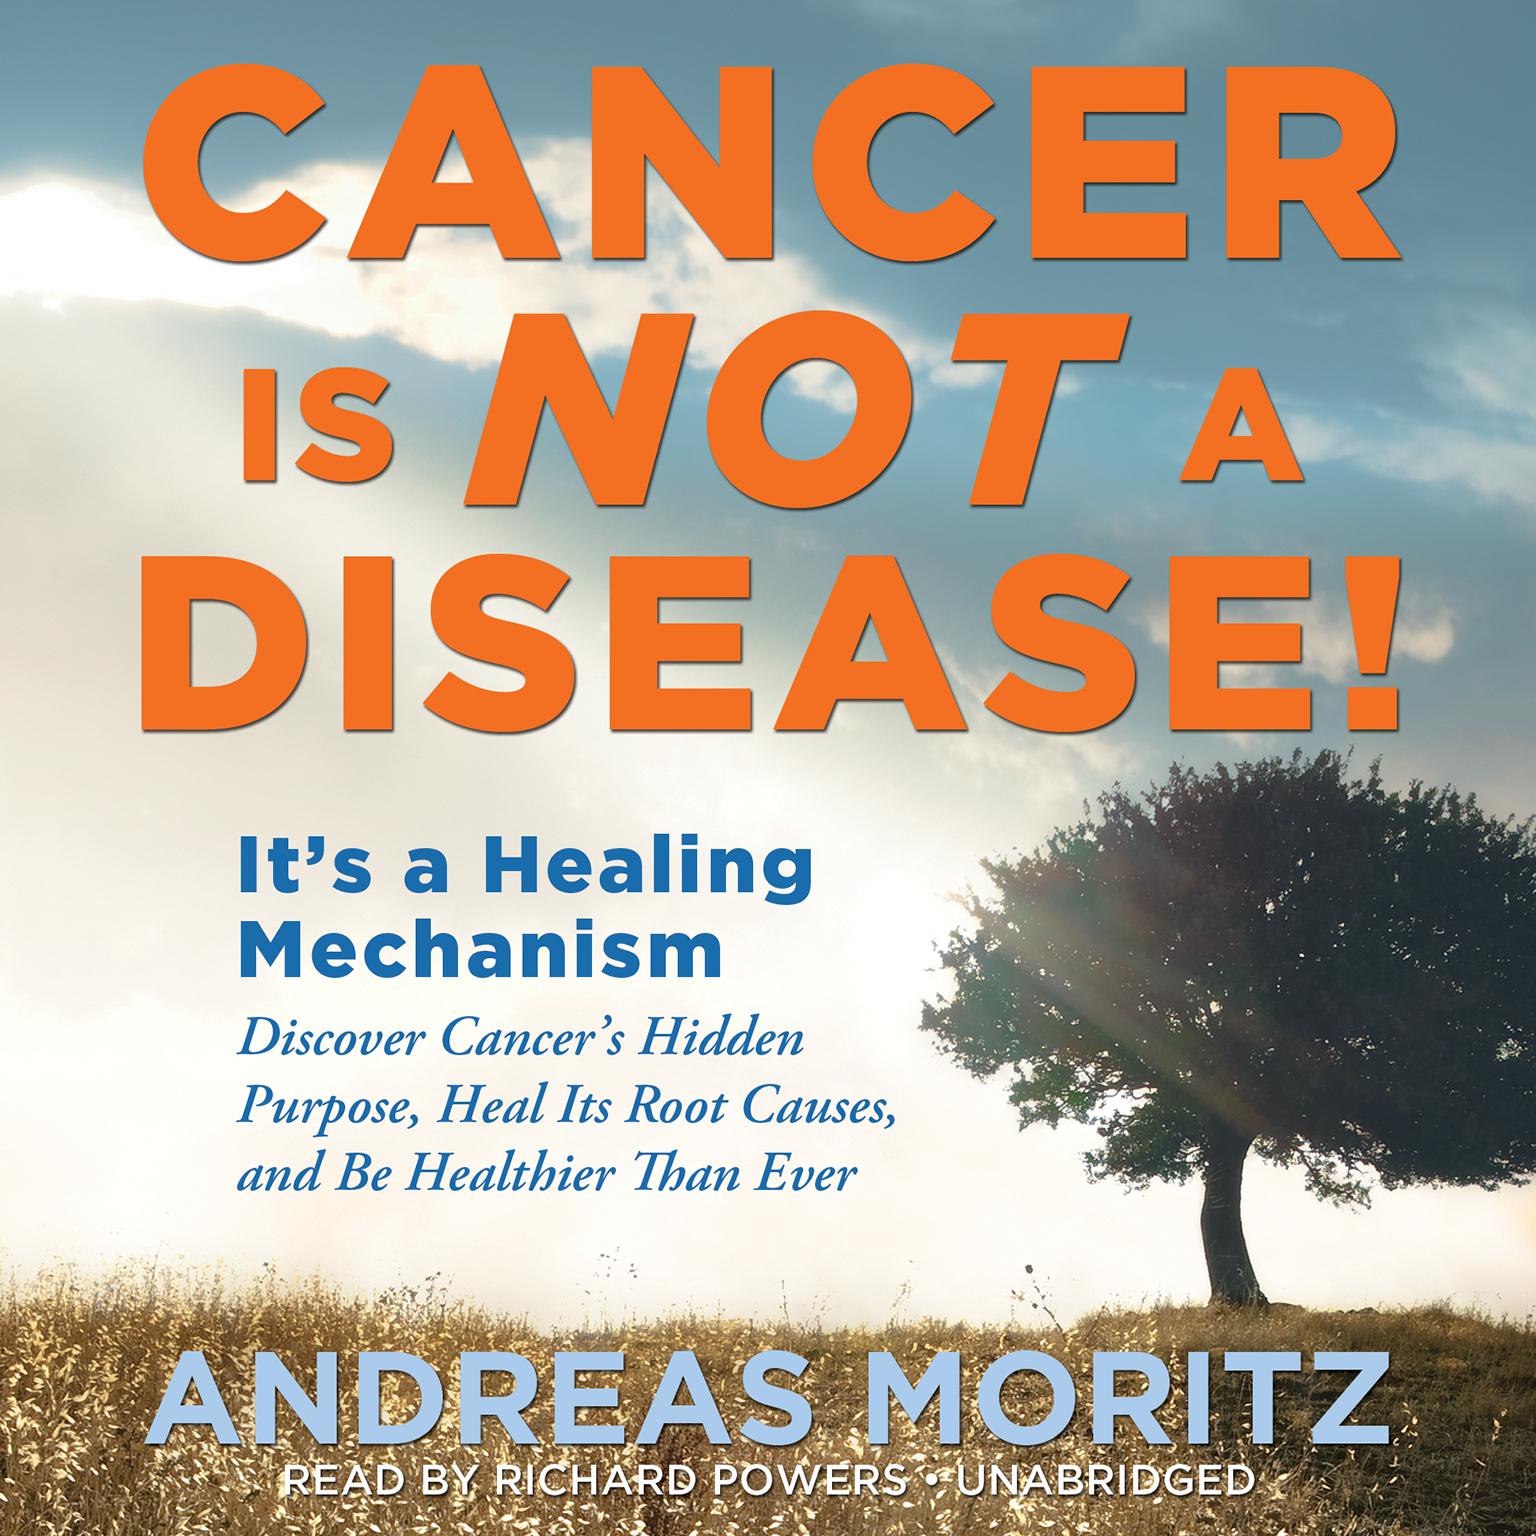 Cancer Is Not a Disease!: It’s a Healing Mechanism; Discover Cancer’s Hidden Purpose, Heal Its Root Causes, and Be Healthier Than Ever Audiobook, by Andreas Moritz